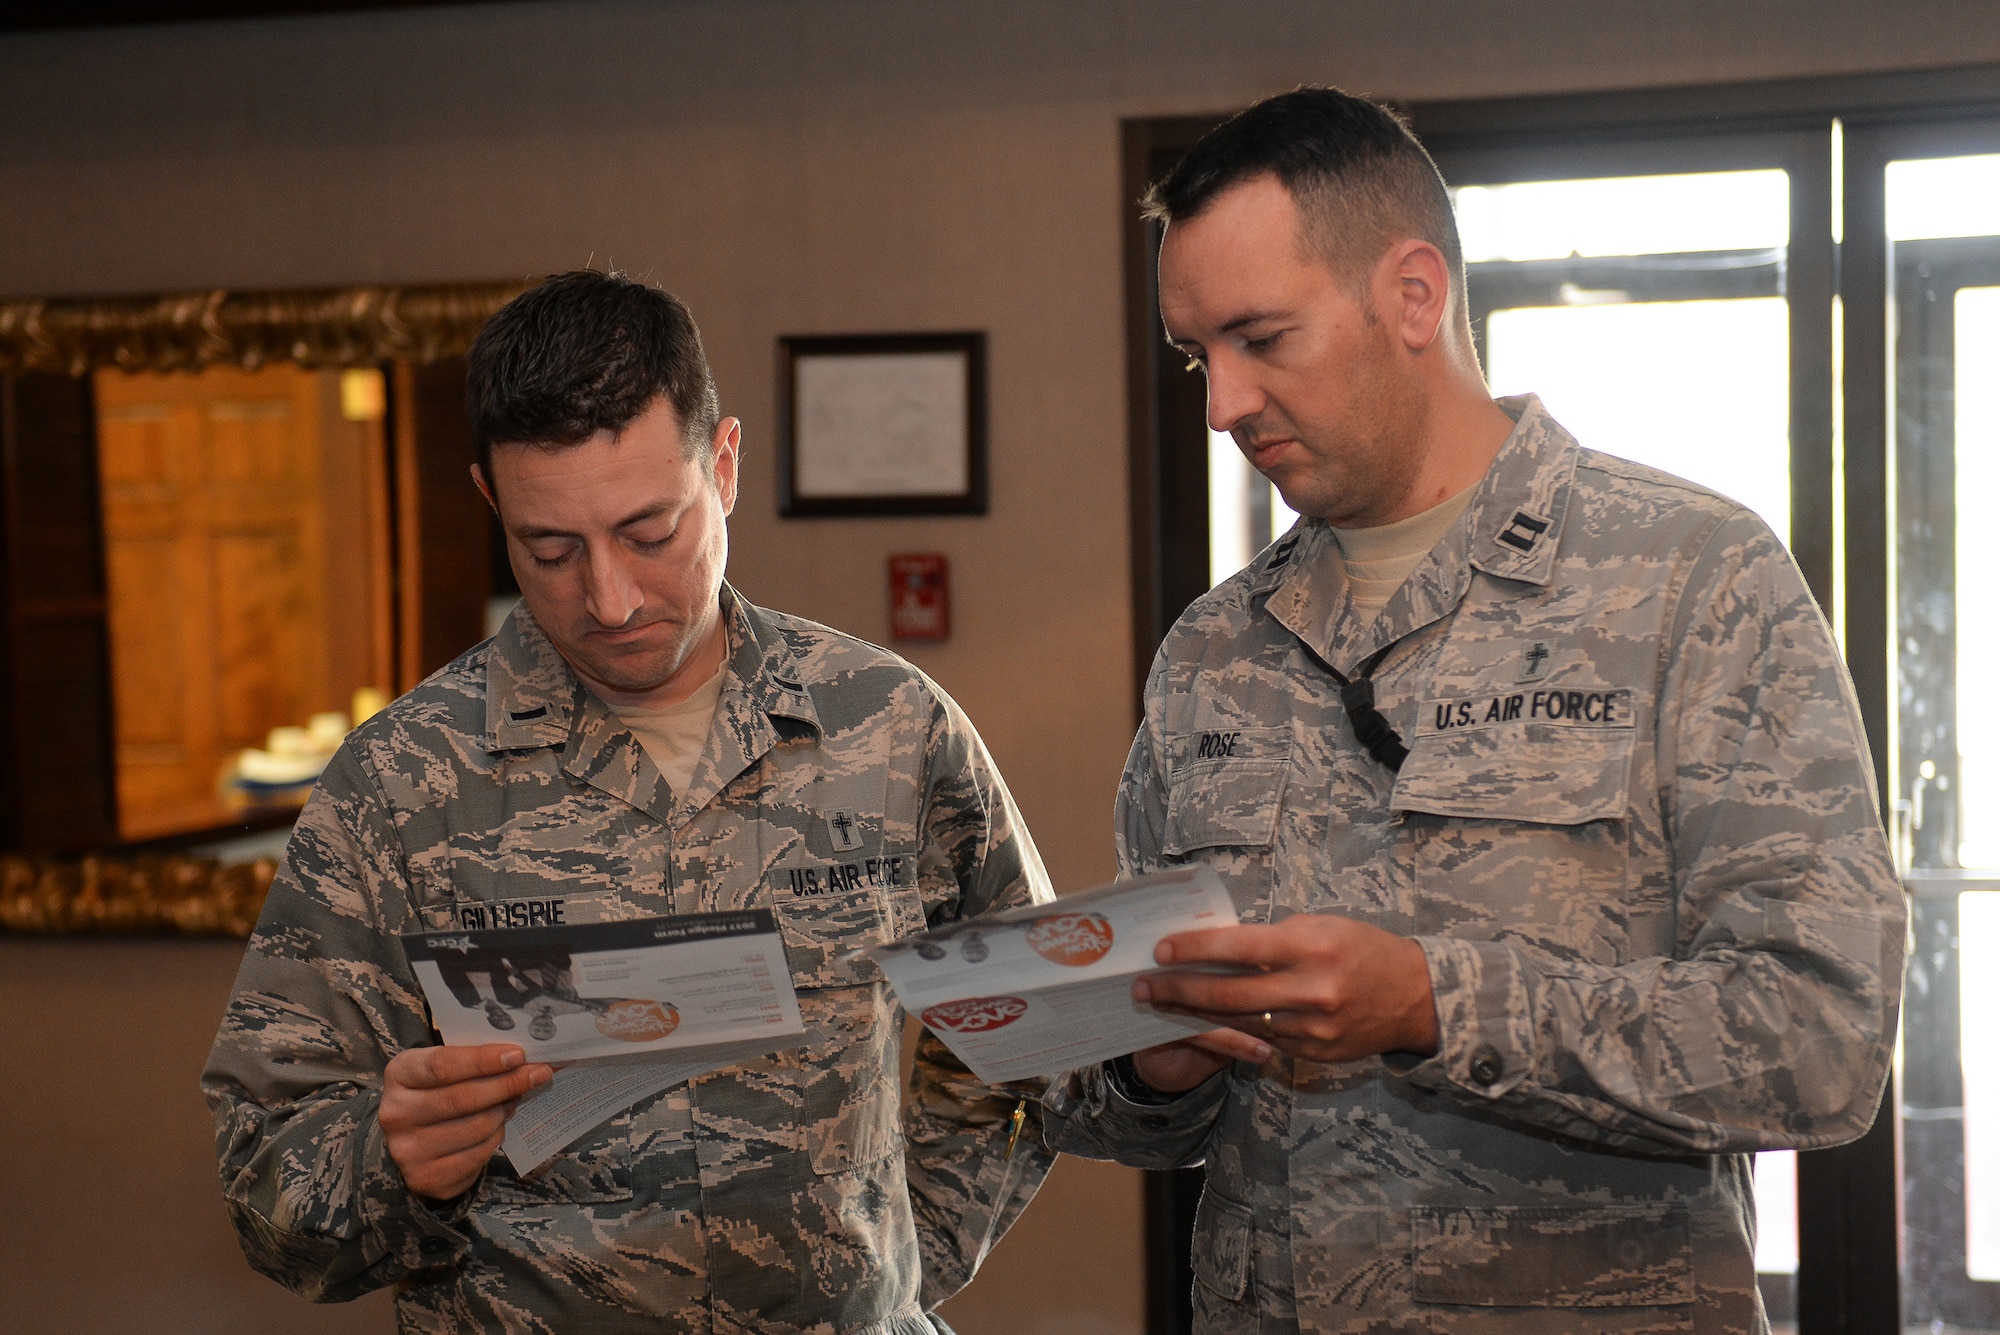 Chaplain (1st Lt.) John Gillispie, 55th Wing Chapel and Chaplain (Capt.) Robert Rose look through the list of charities for the 2017 Combined Federal Campaign at the CFC kick-off on Nov. 21, 2017 at the Patriot Club on Offutt AFB, Neb.